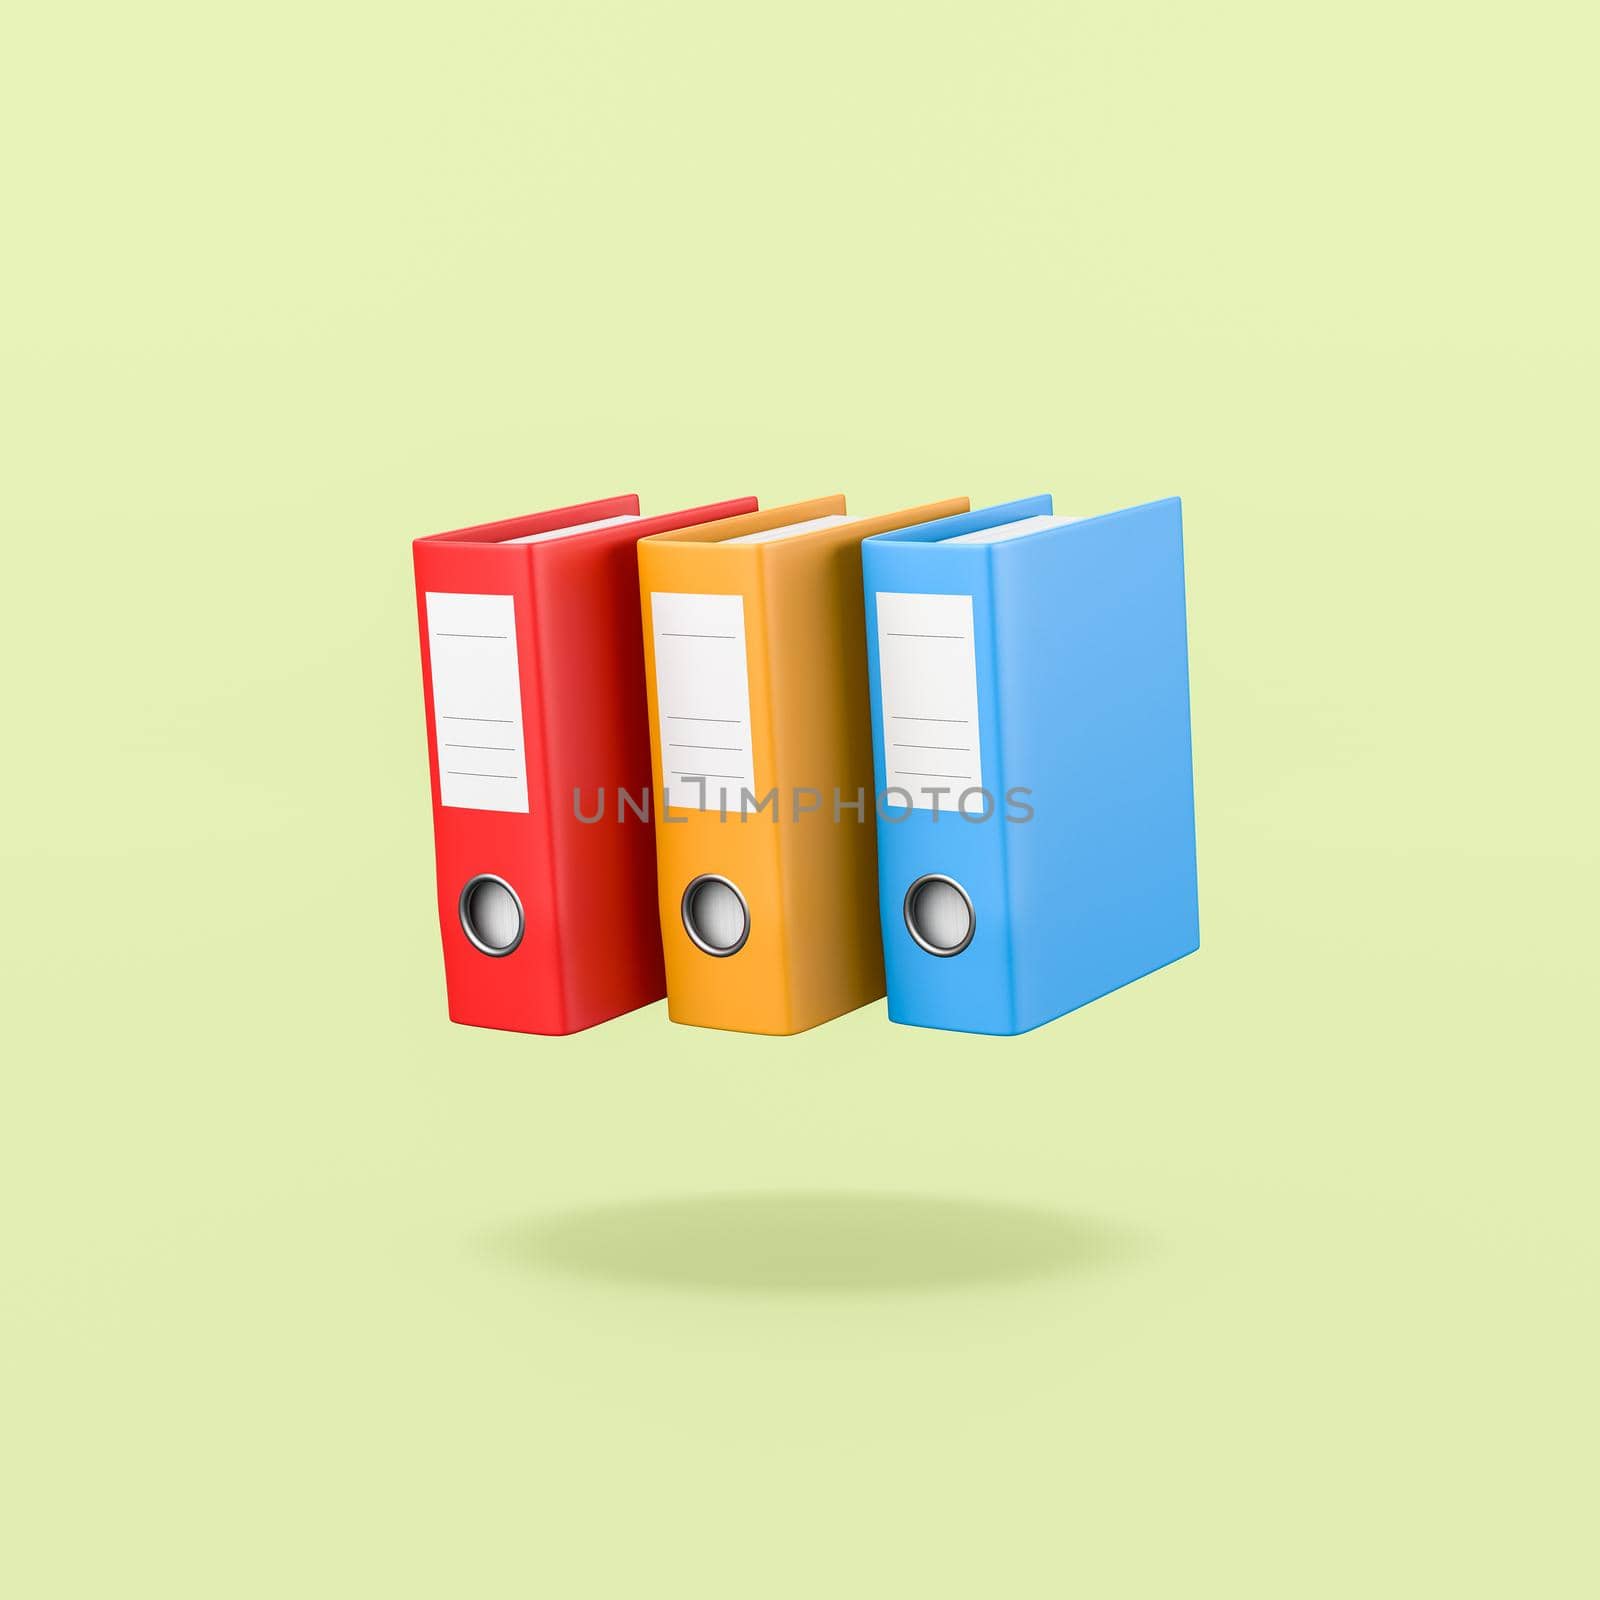 Set of Three Colorful Binders Isolated on Flat Green Background with Shadow 3D Illustration